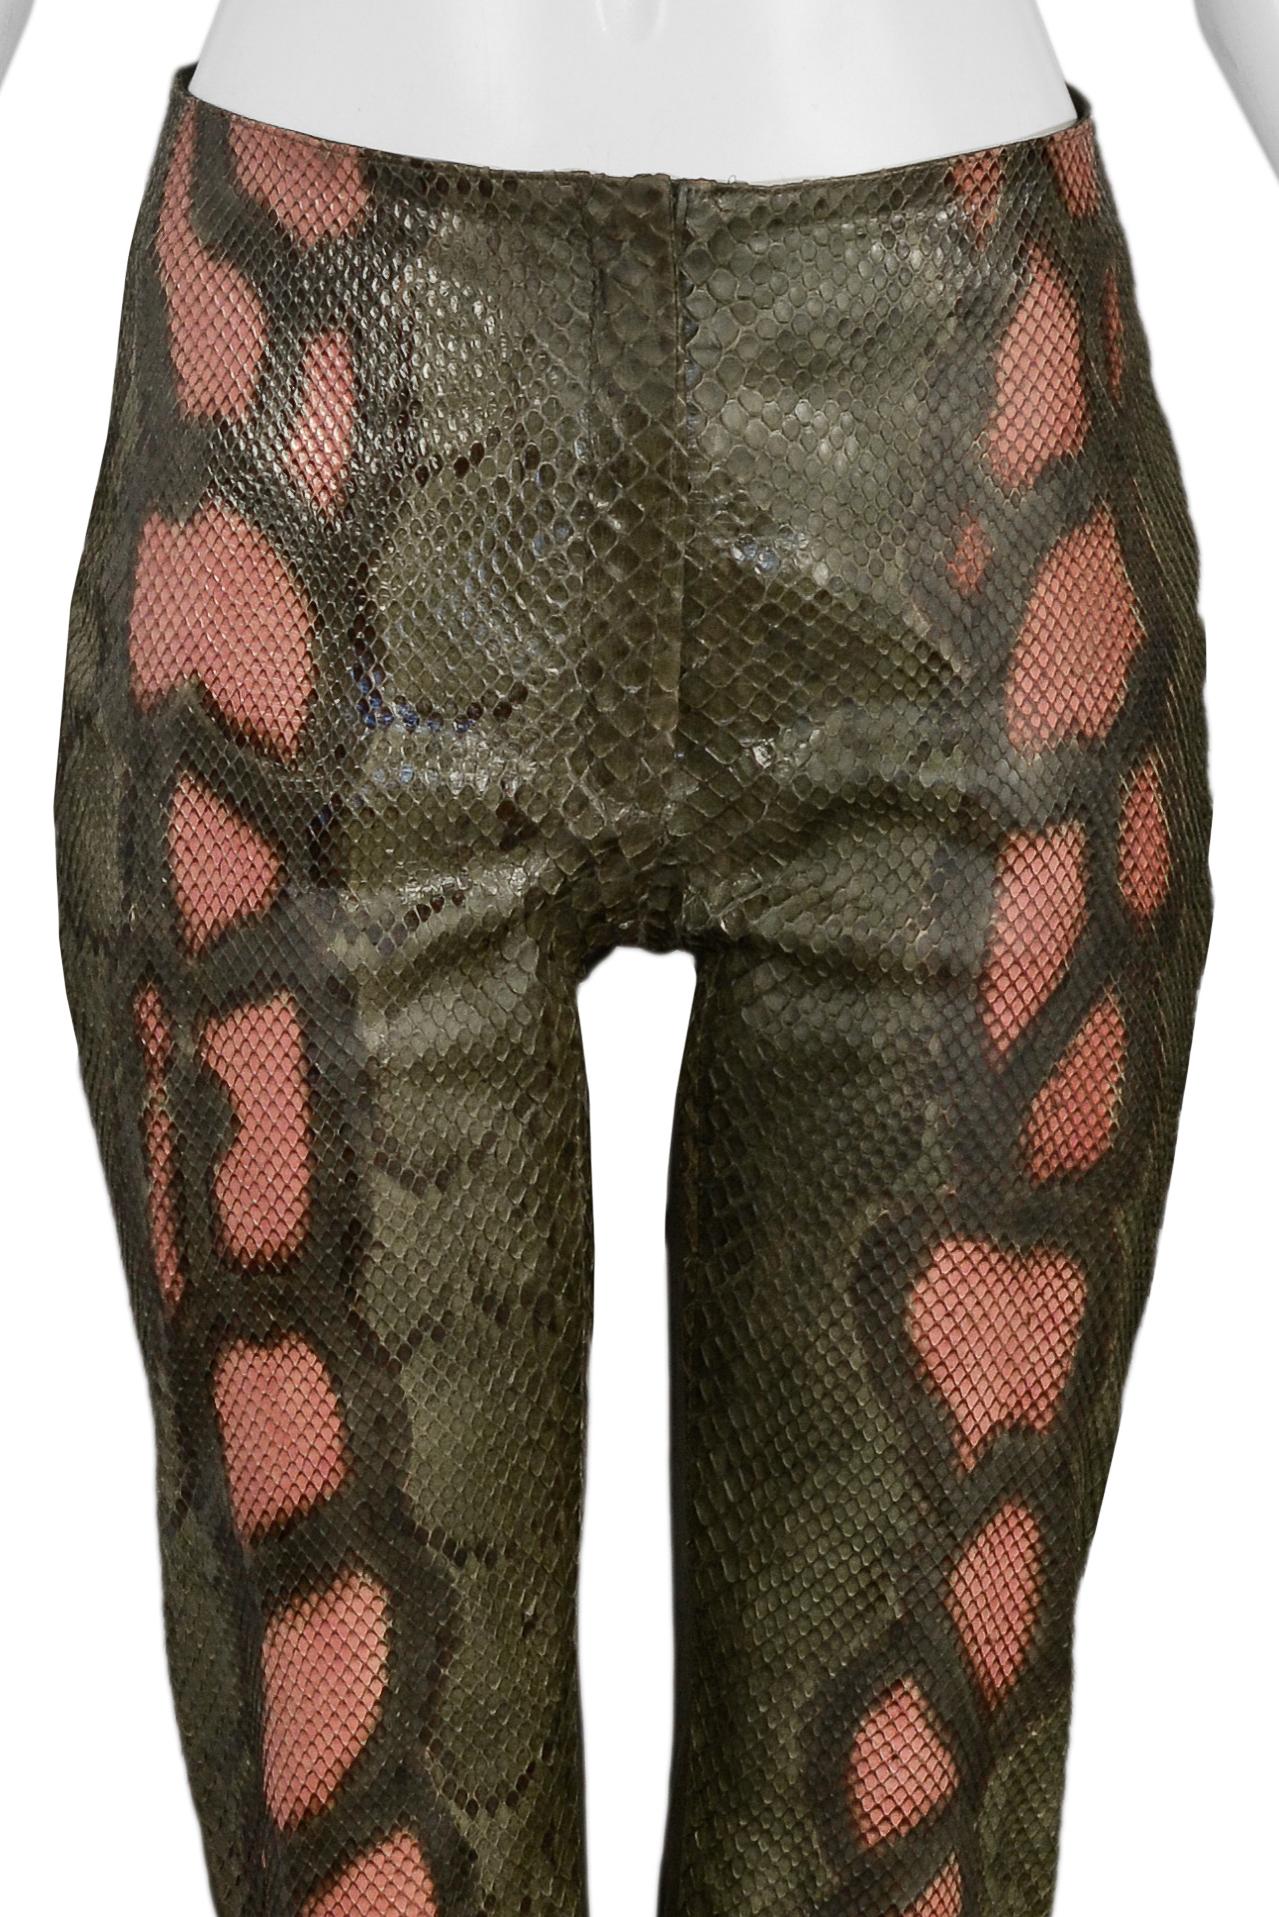 Stunning Jean-Claude Jitrois Green and Pink Python and Leather Pants ...